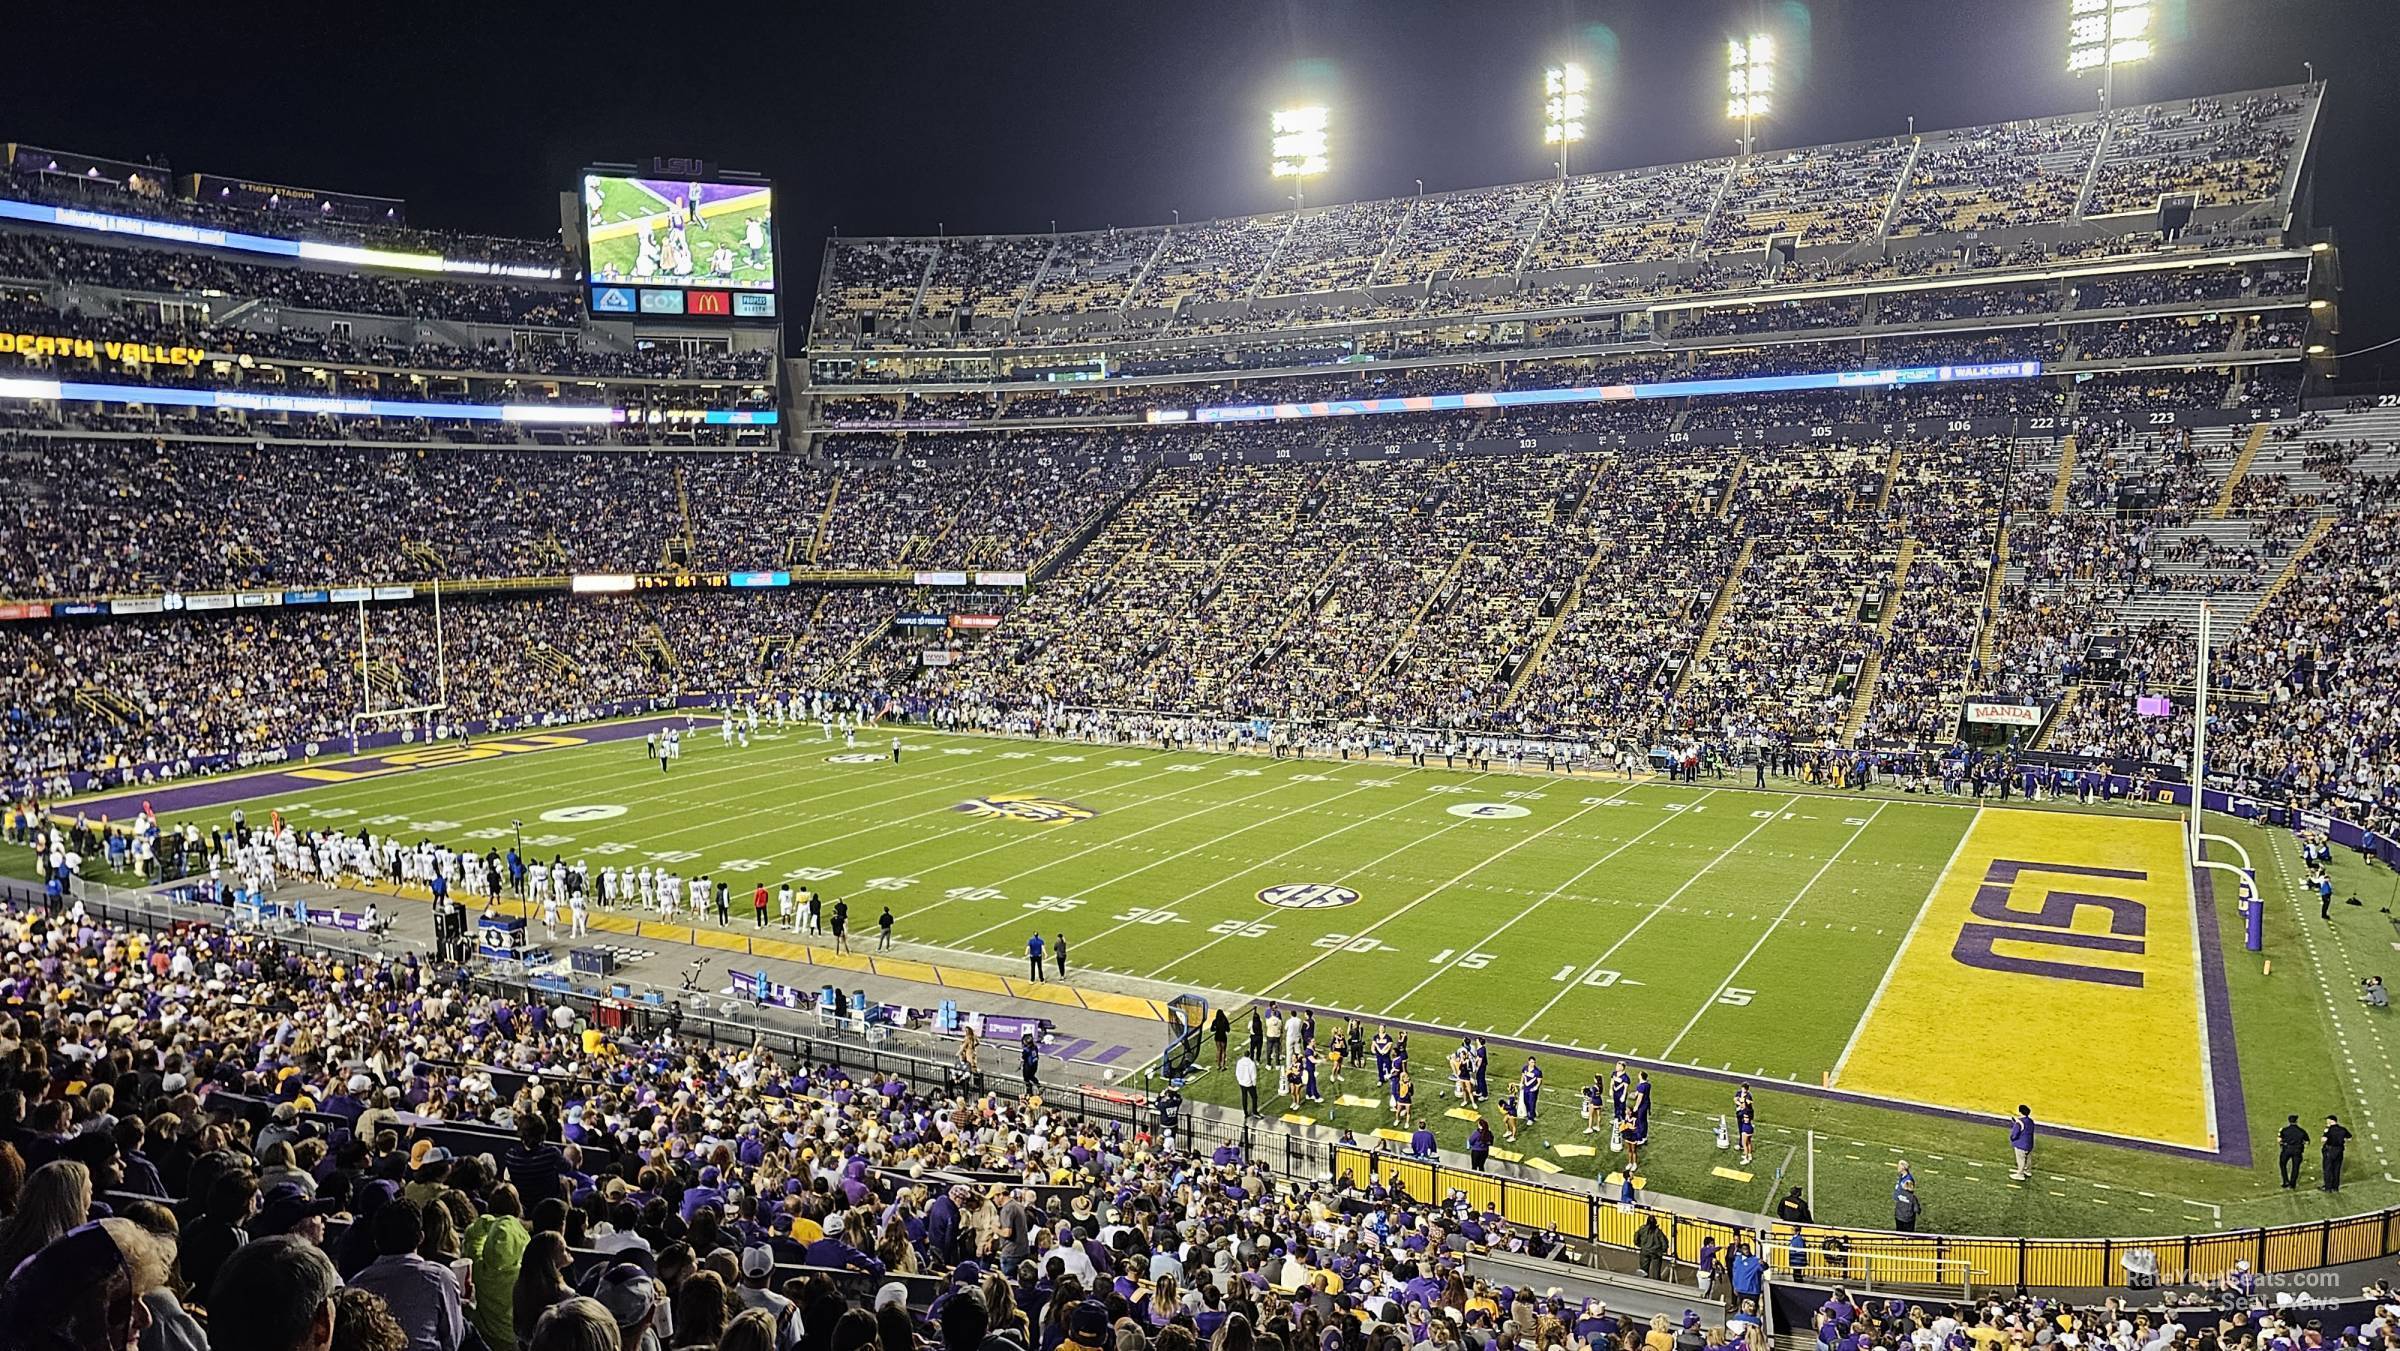 section 243, row 1 seat view  - tiger stadium